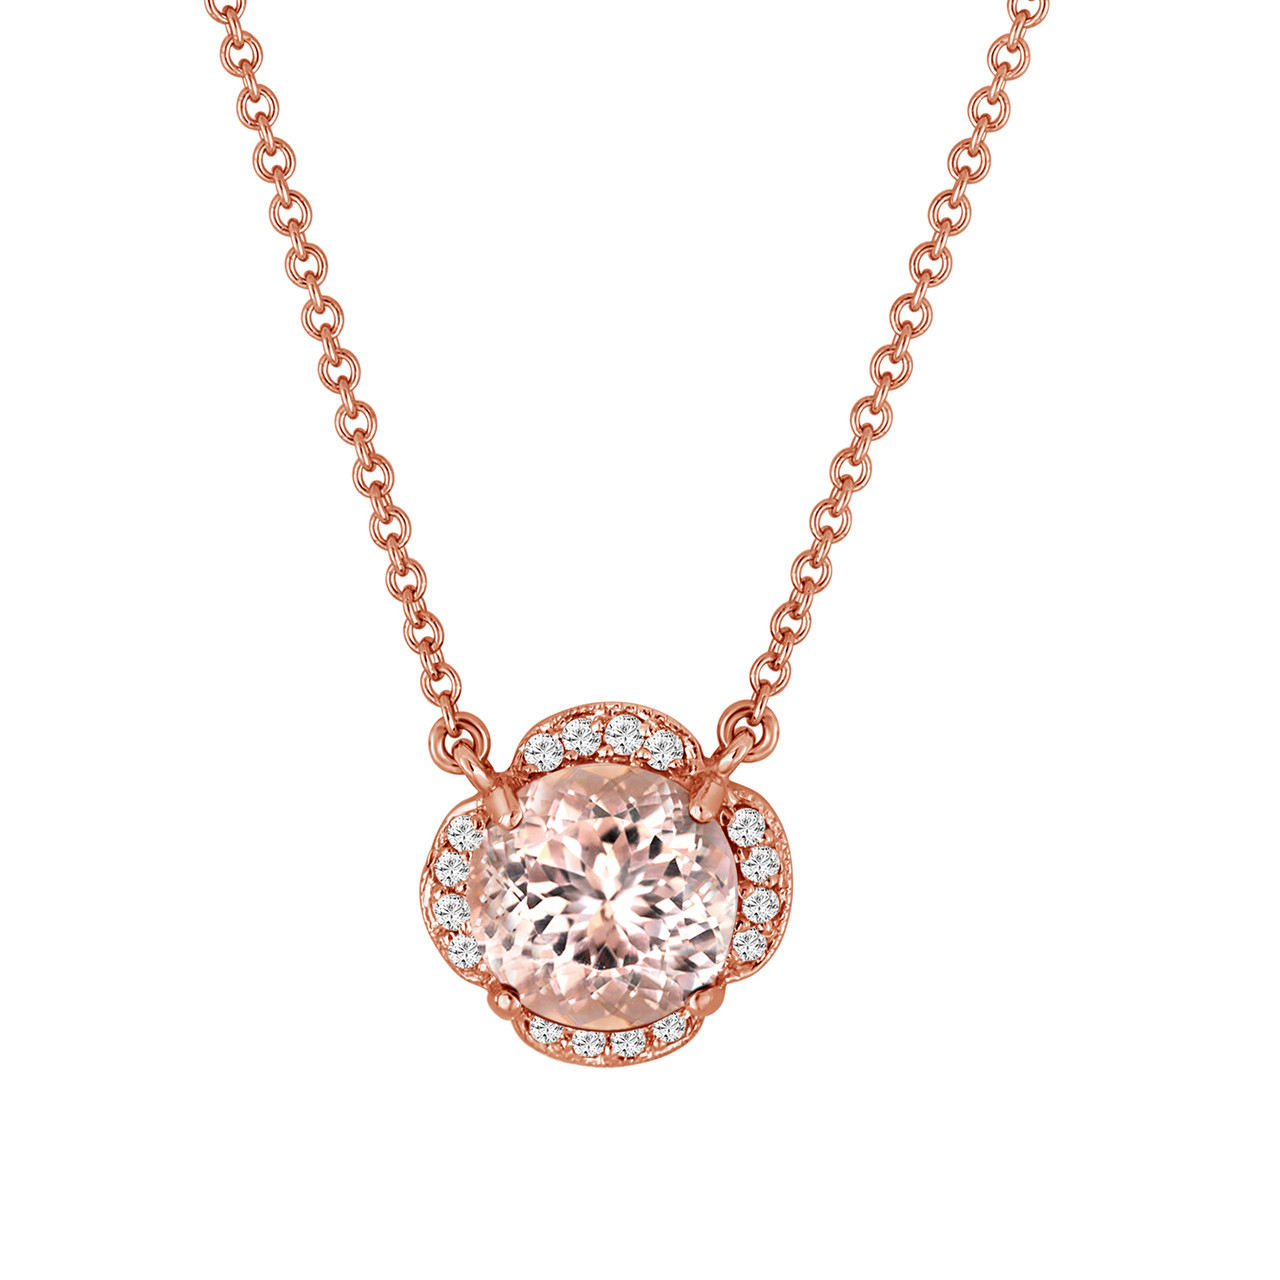 Christmas Rose Gold Natural Morganite Pendant Silver Handmade Necklace  Jewelry | eBay